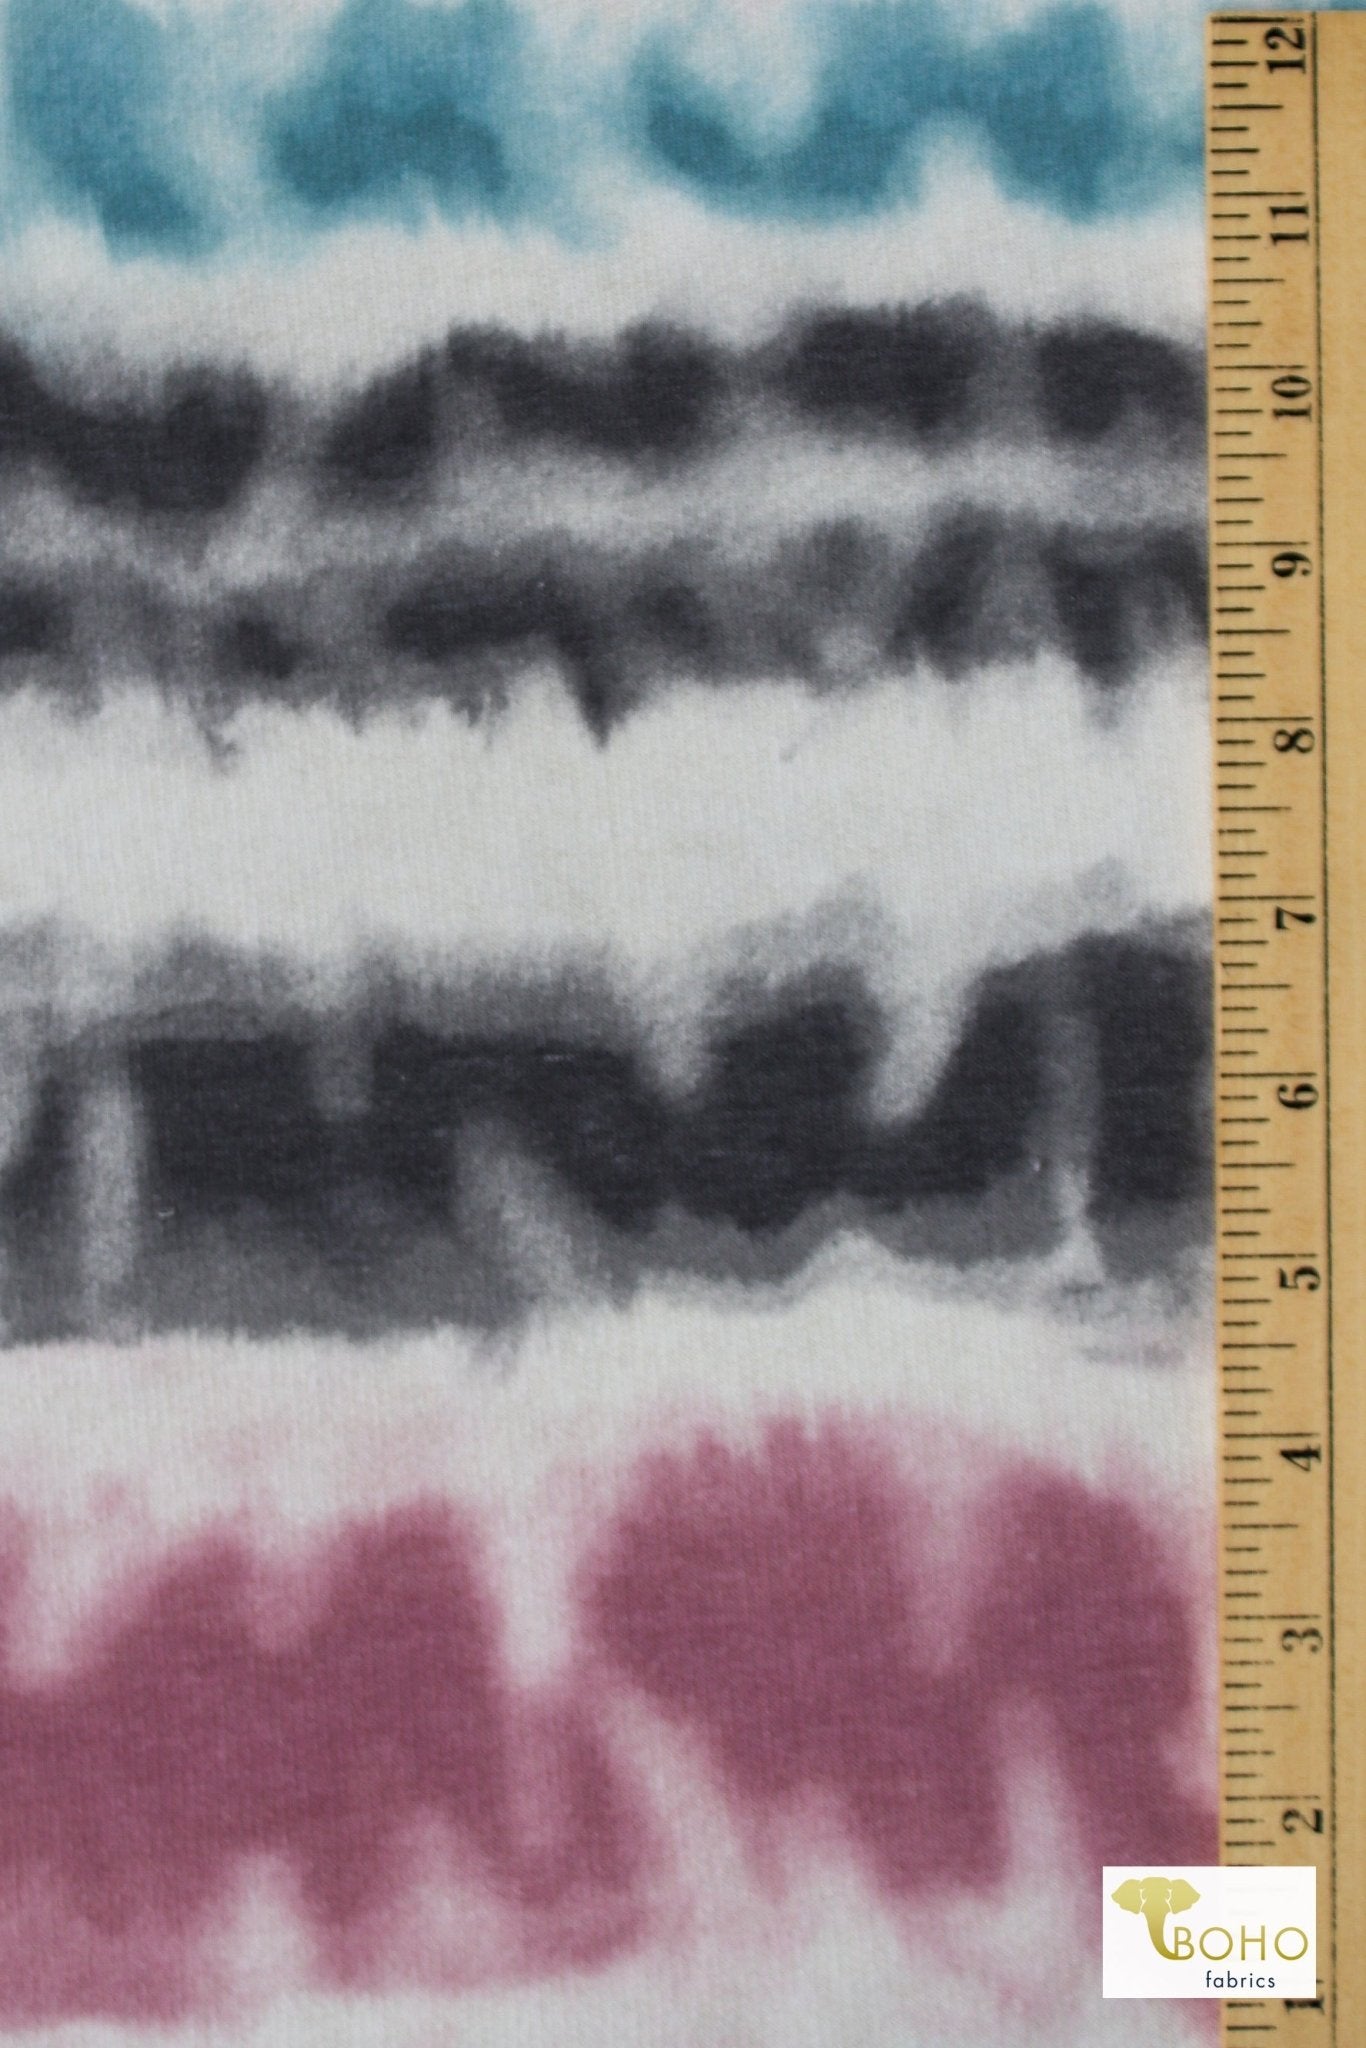 Pink, Blue & Gray Ombre Stripes, French Terry Printed Knit Fabric - Boho Fabrics